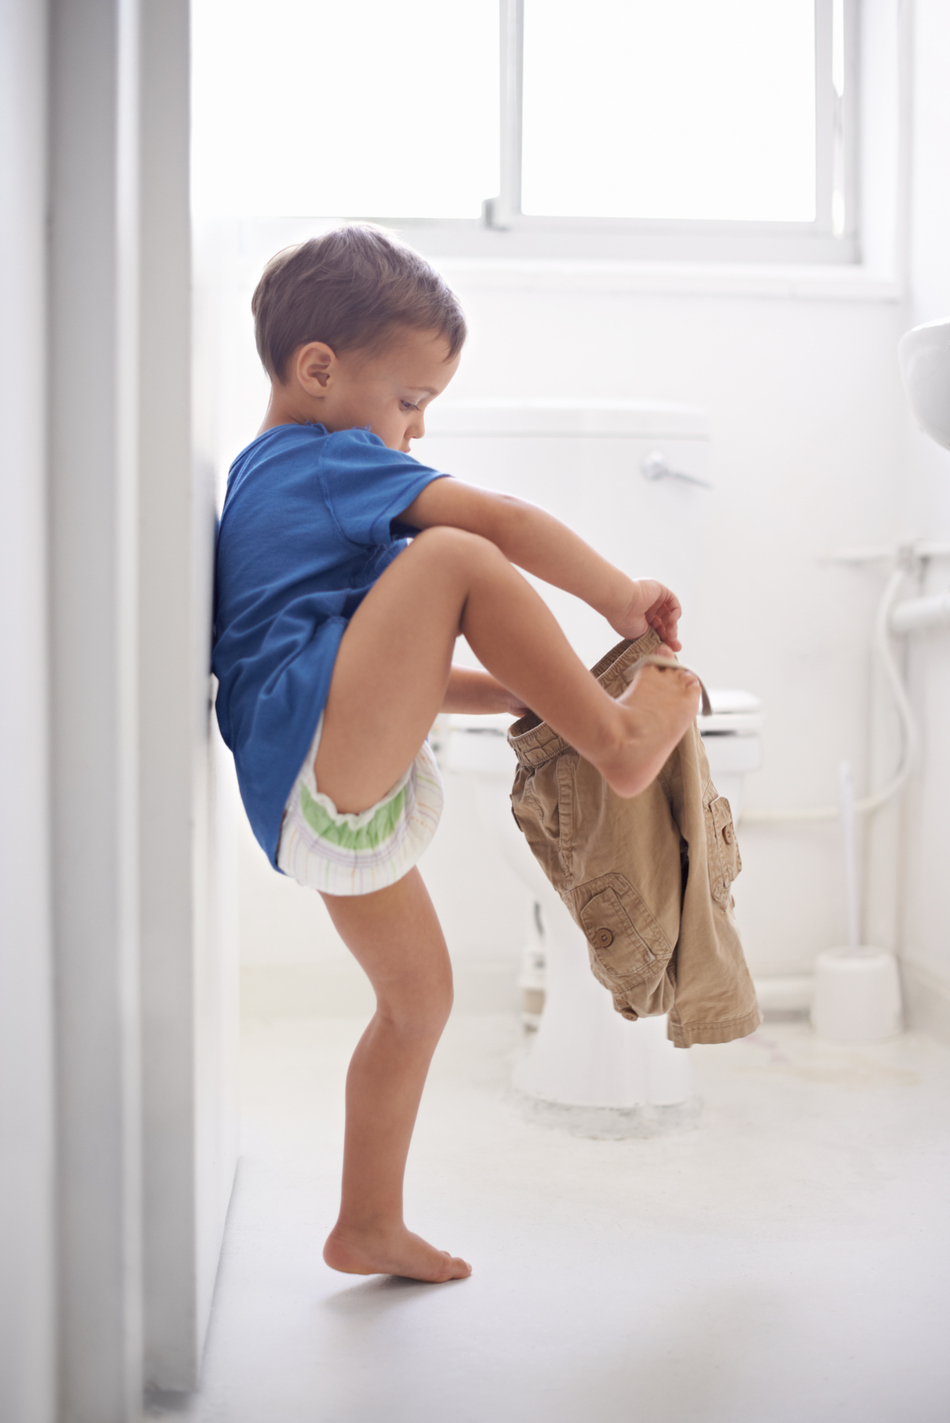 When Should A Child Be Out of Diapers?